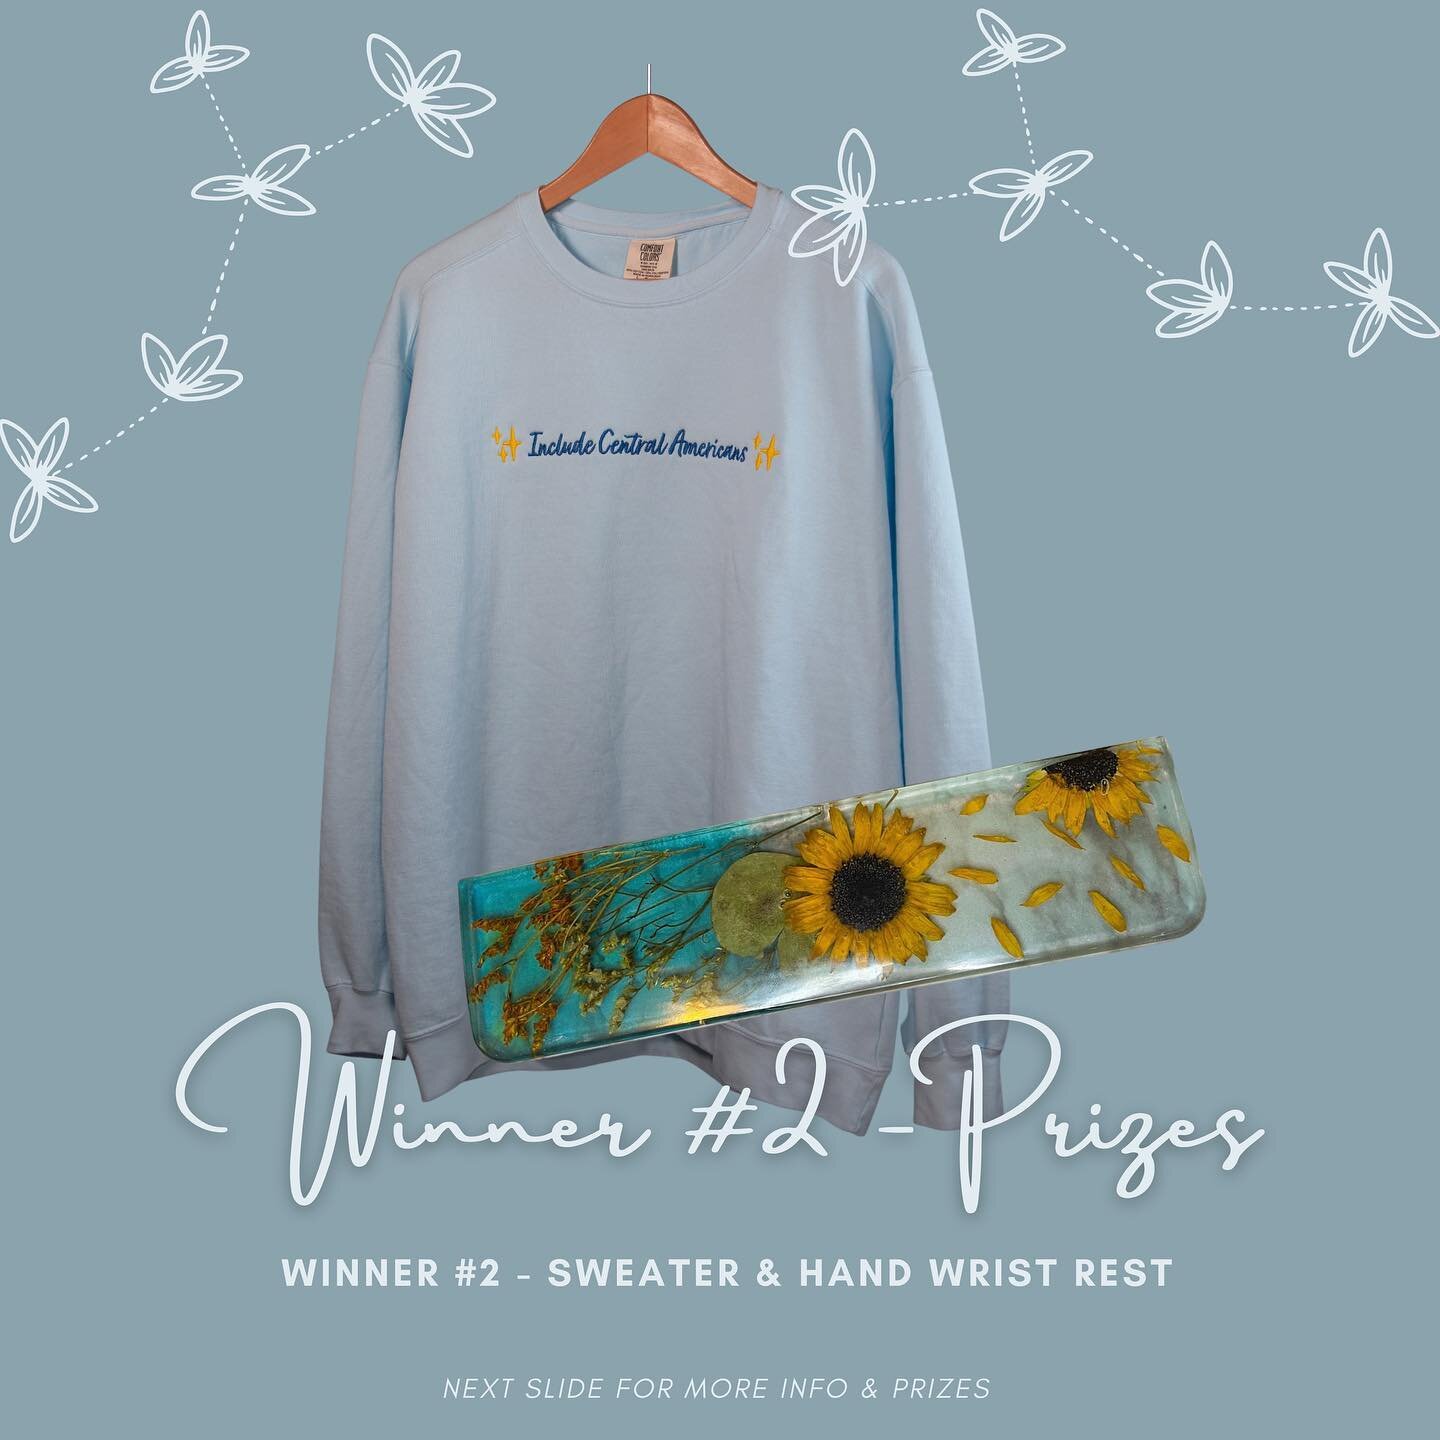 ✨Raffle✨

Winner #2 Prize:

 Sweater &amp; Hand Wrist Rest by @myflowerspath.shop 

✨ HOW TO ENTER ✨

$5 FOR EACH ENTRY

🎙 Send your entry to our Venmo with your social media Username (IG or TW) as a comment. 

🎙 You can enter multiple times

🎙 If